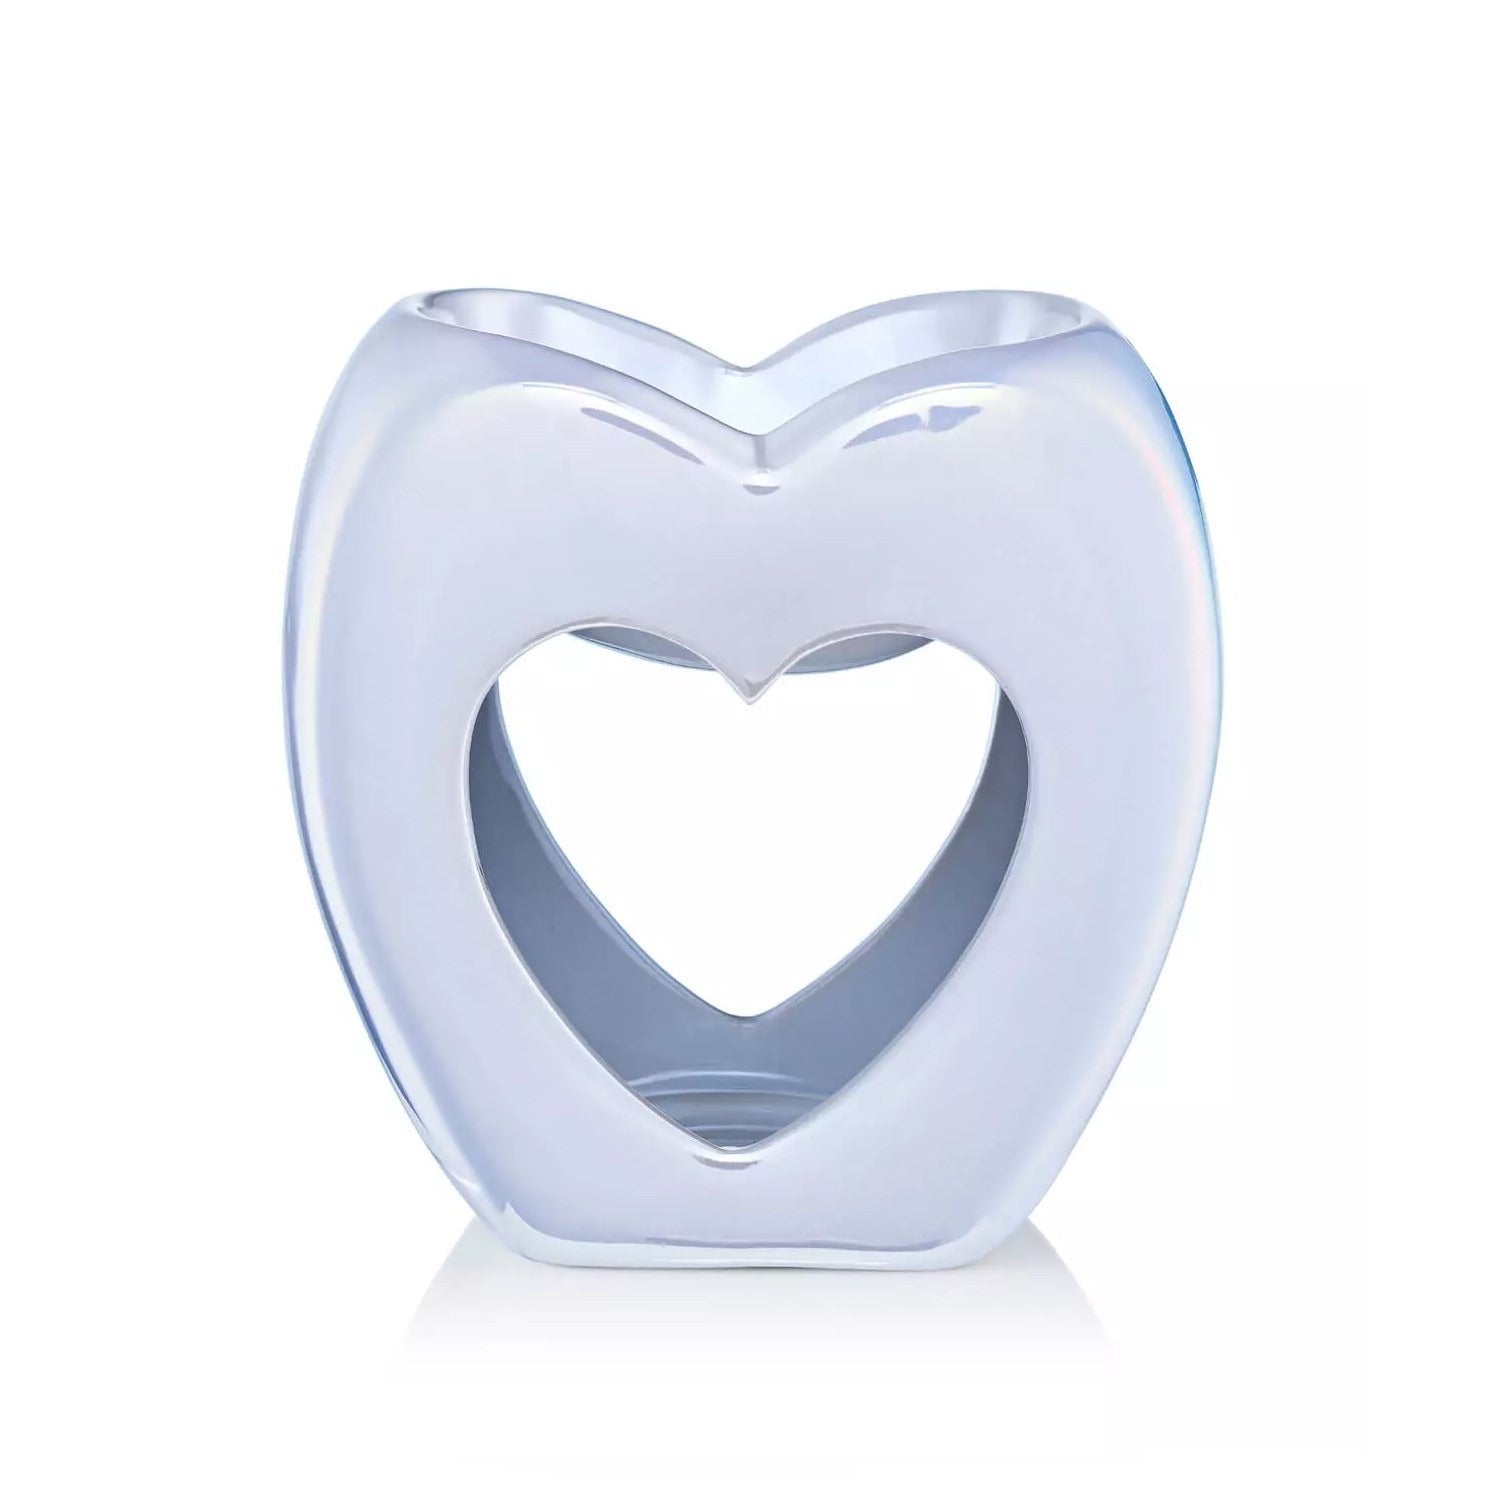 View Ava May Heart Shaped Burner Pearlised White information